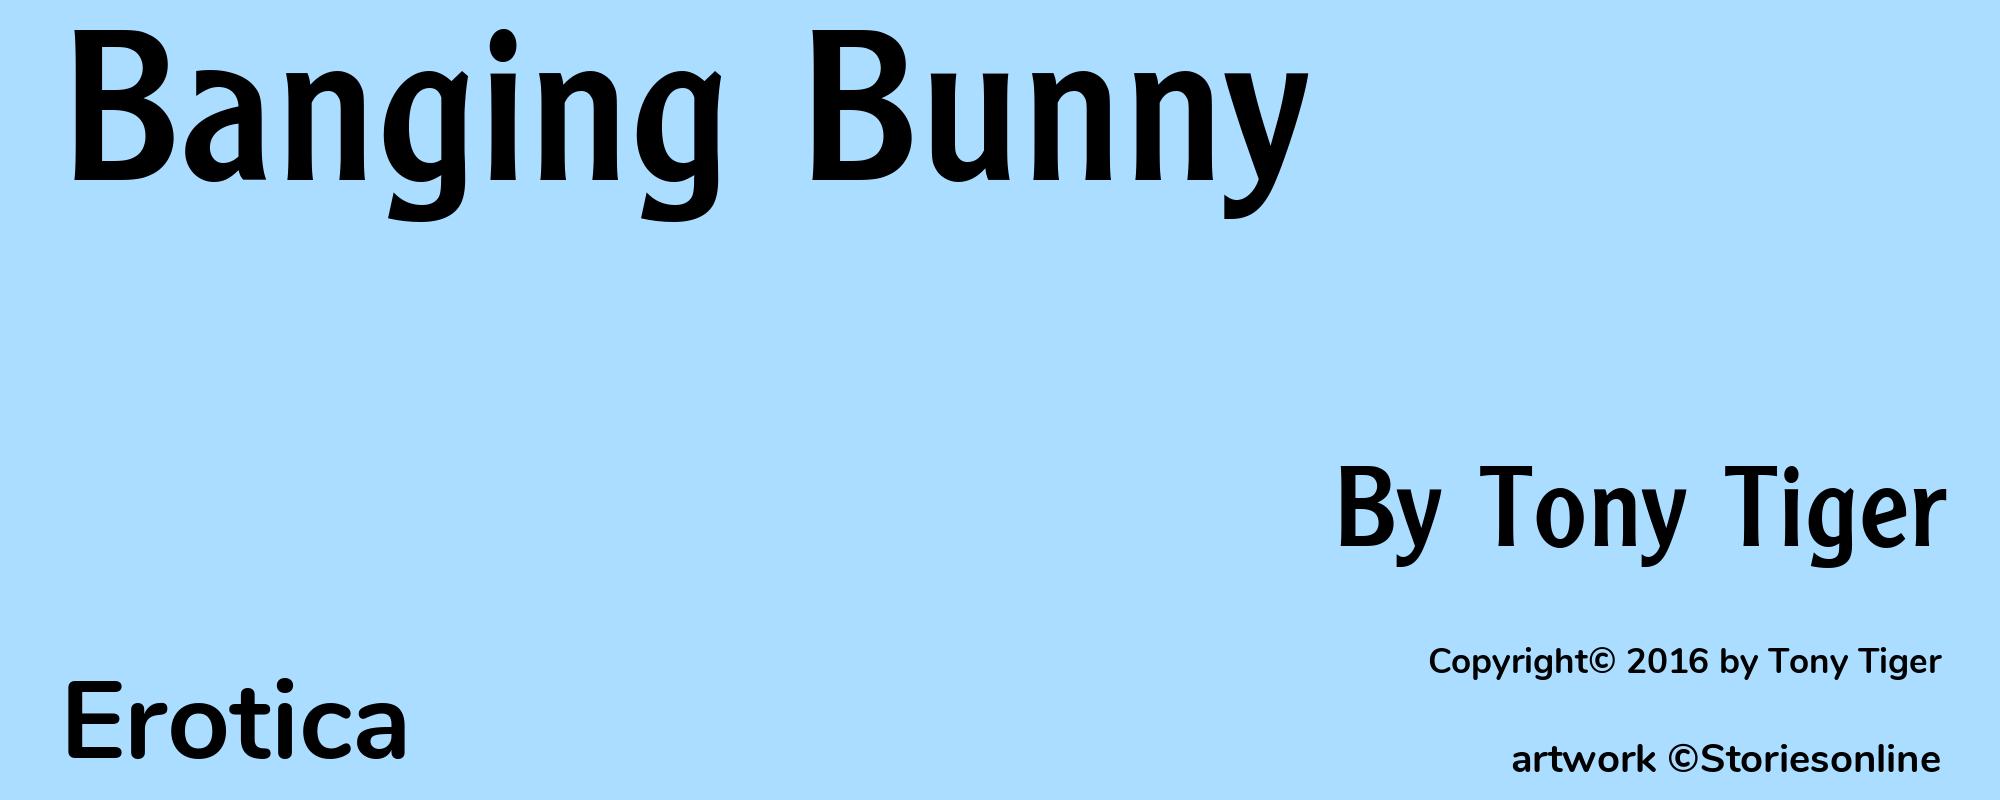 Banging Bunny - Cover